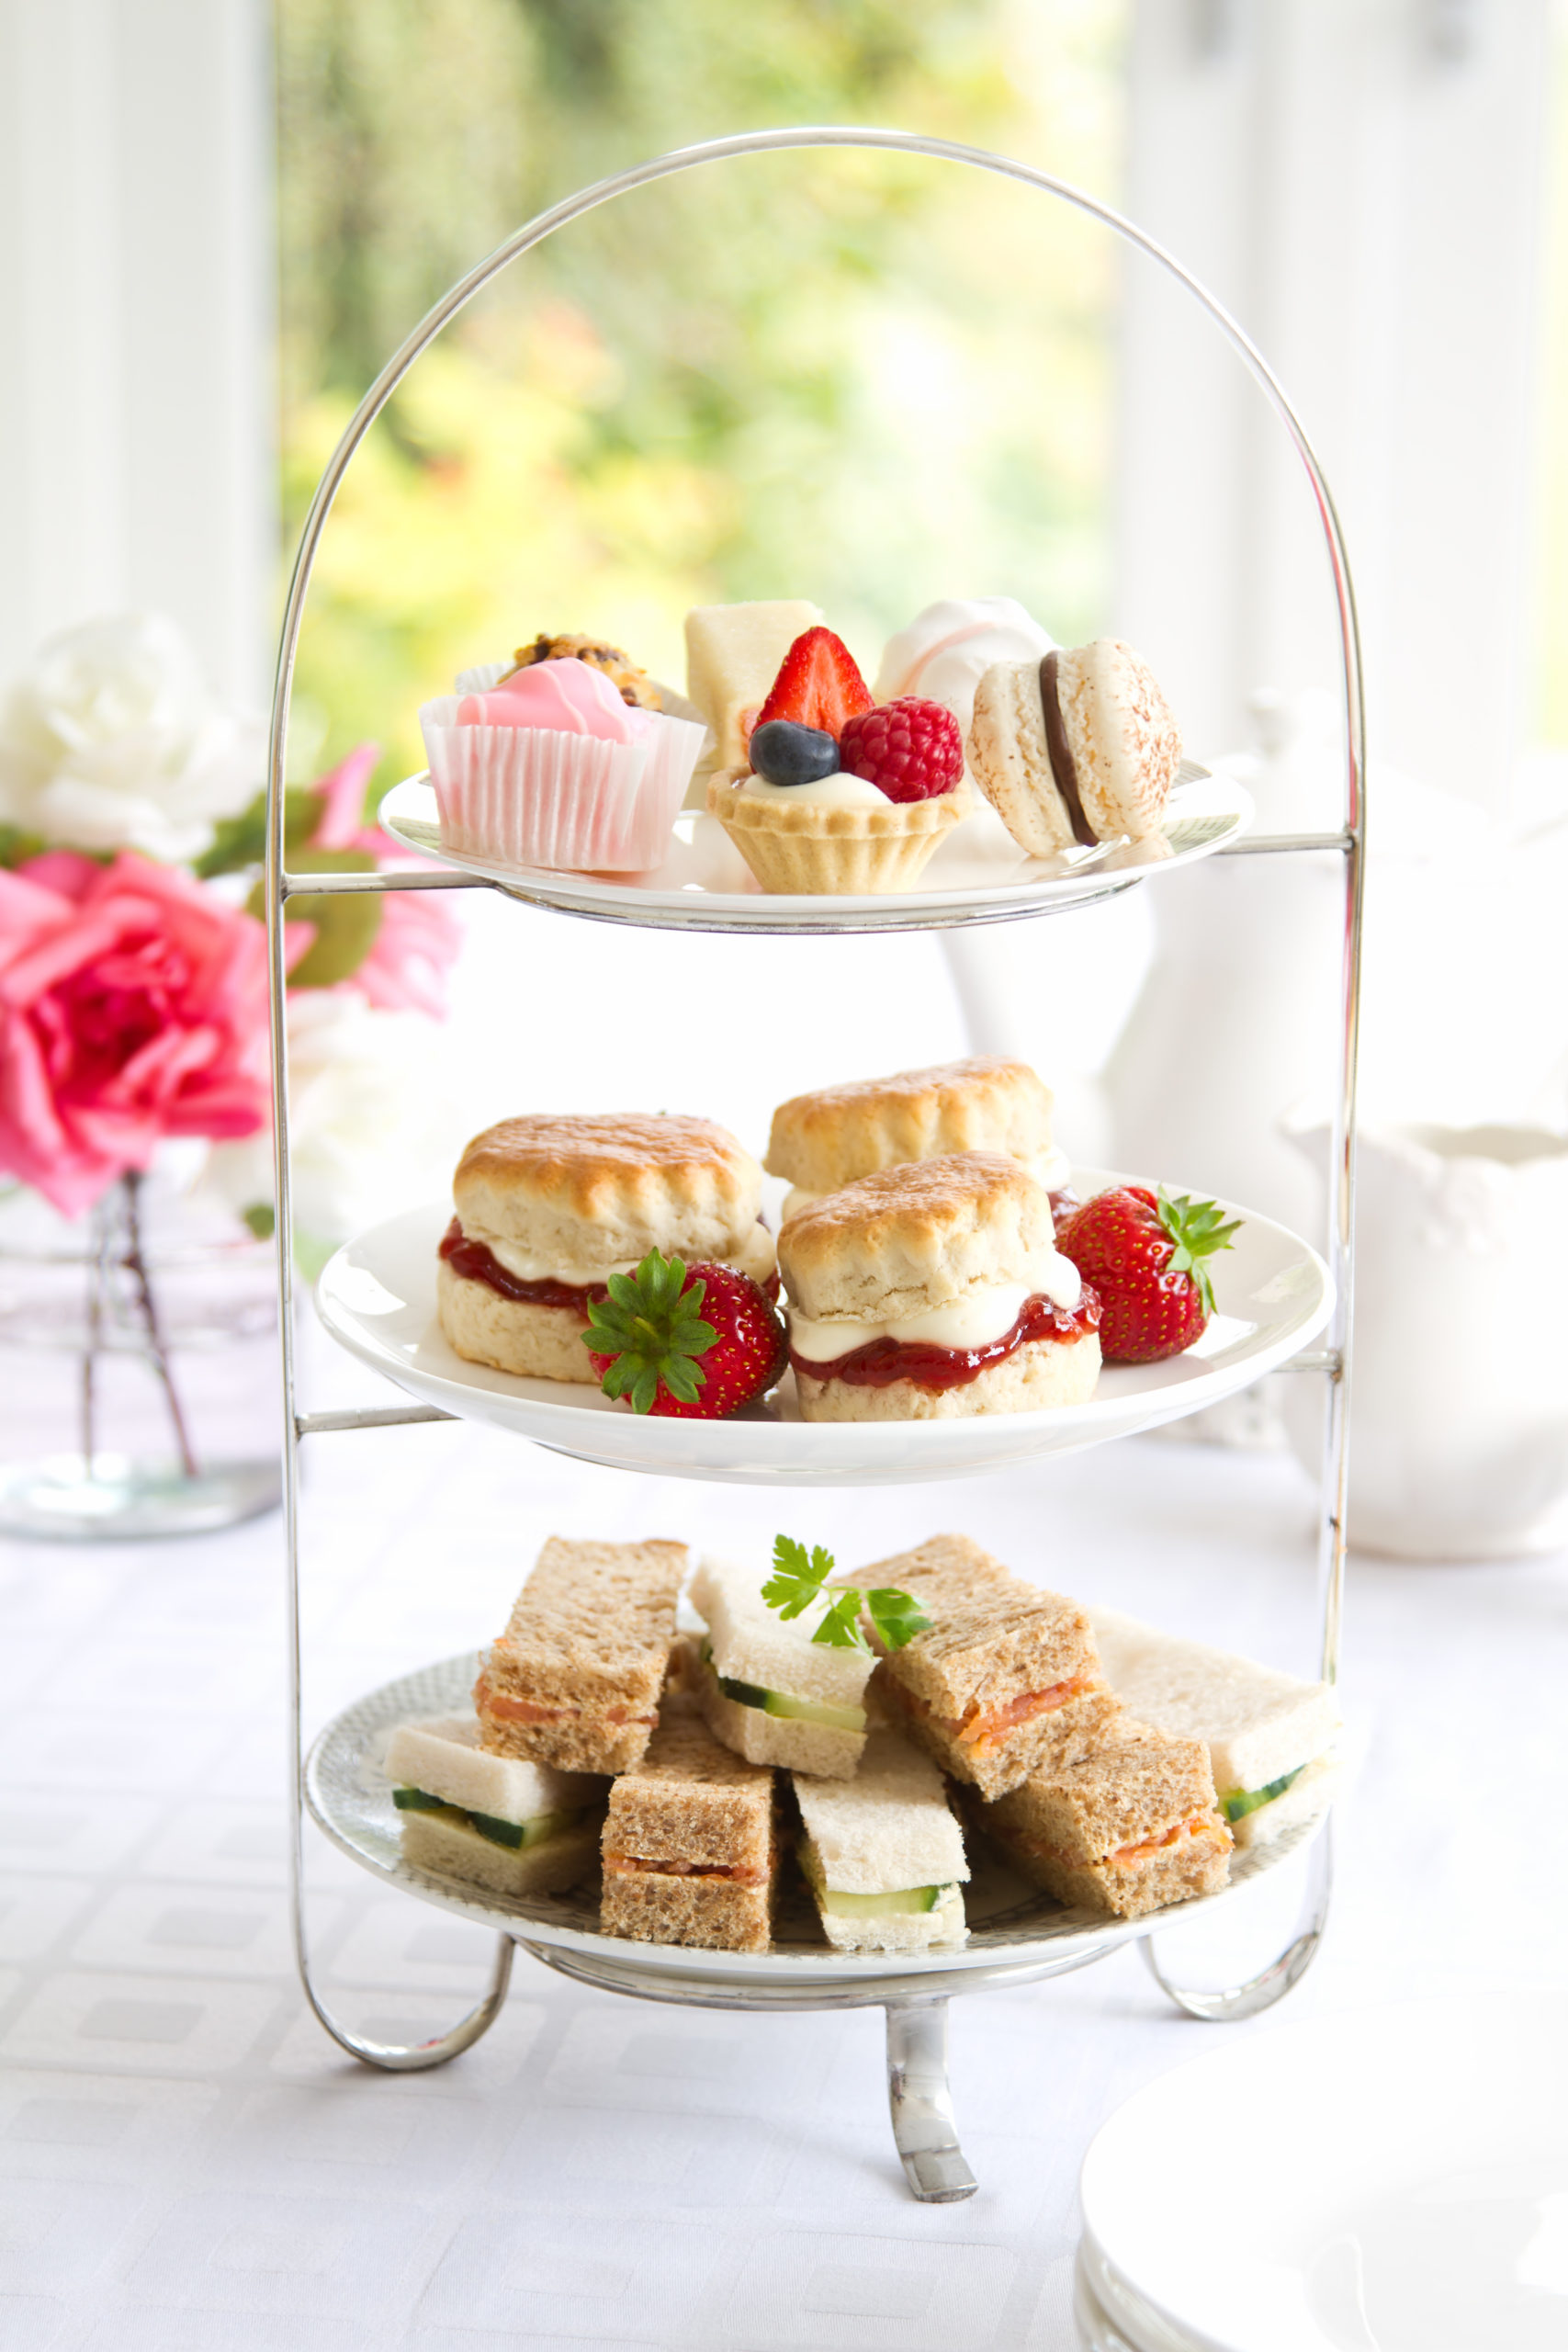 Traditional afternoon tea served with scones